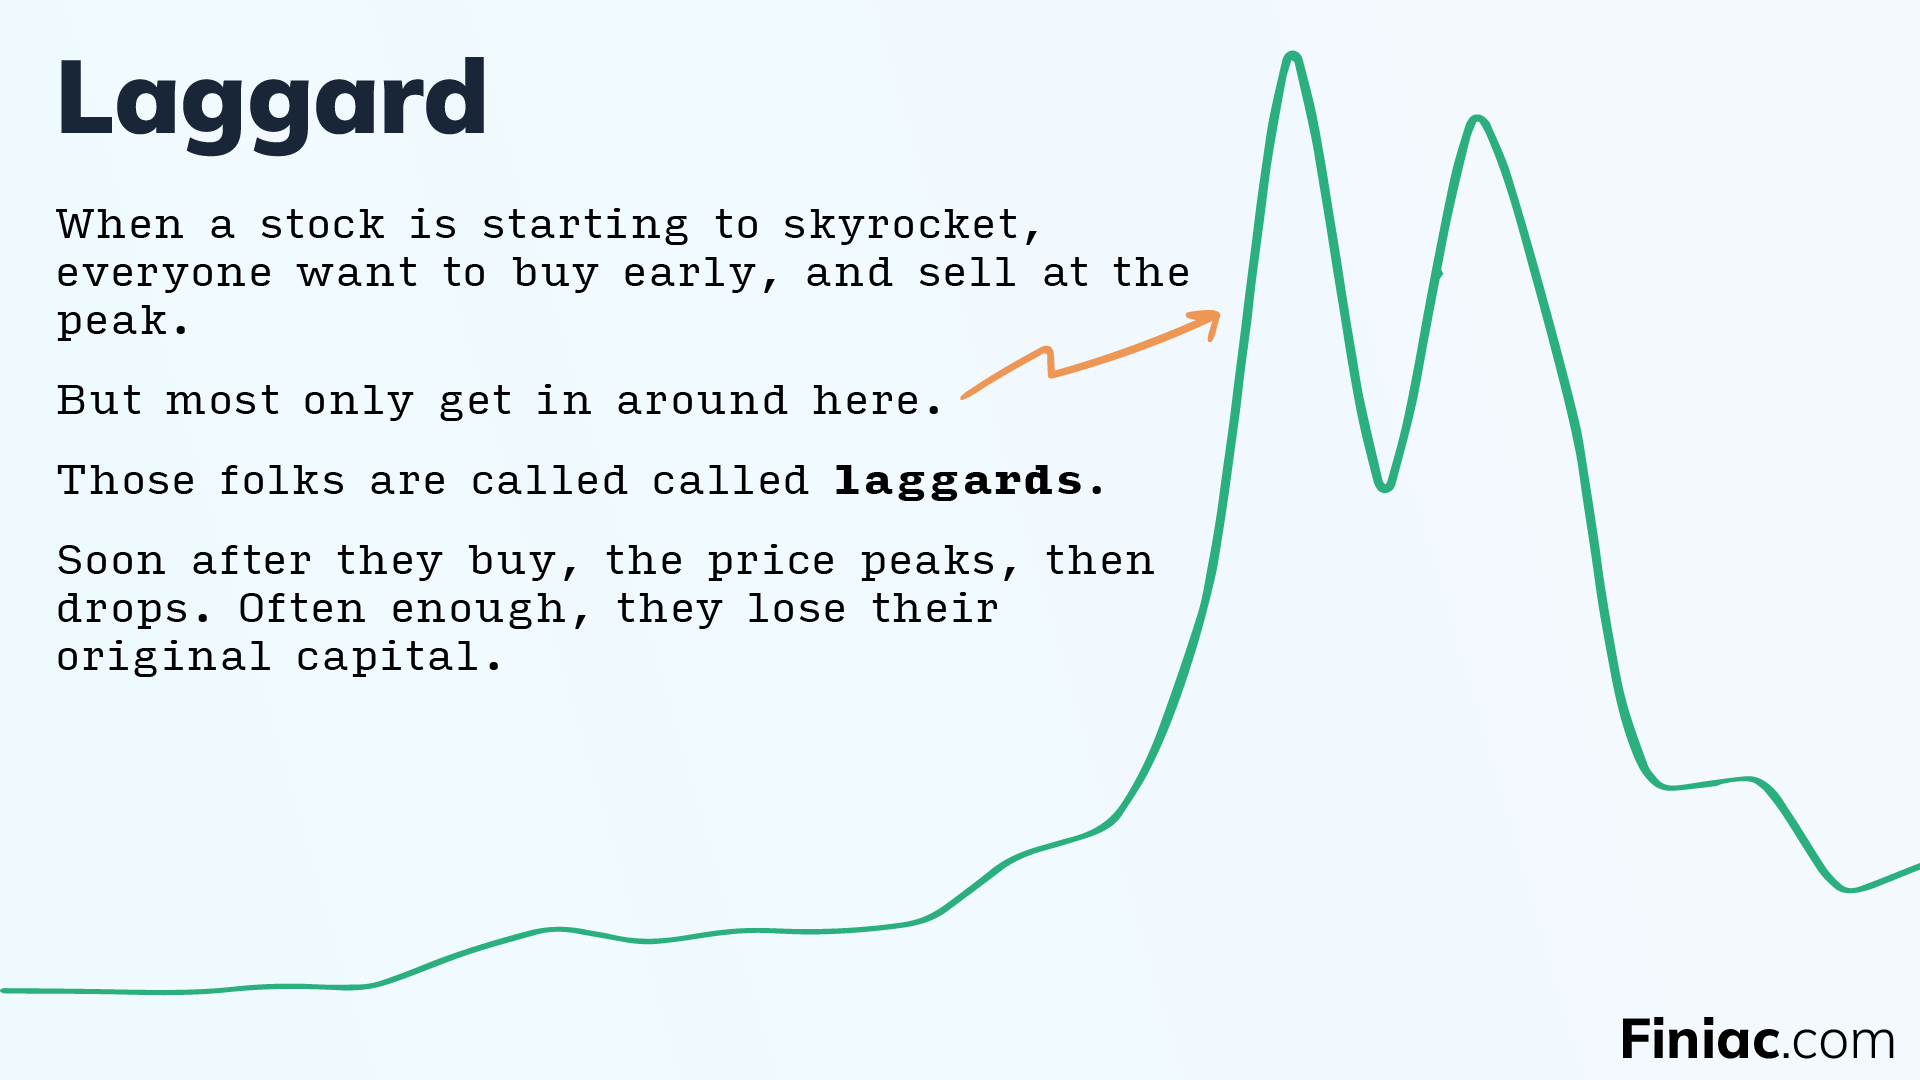 Example of the investing pattern of "laggard" investors, particularly during a hype-based rally for a given stock.